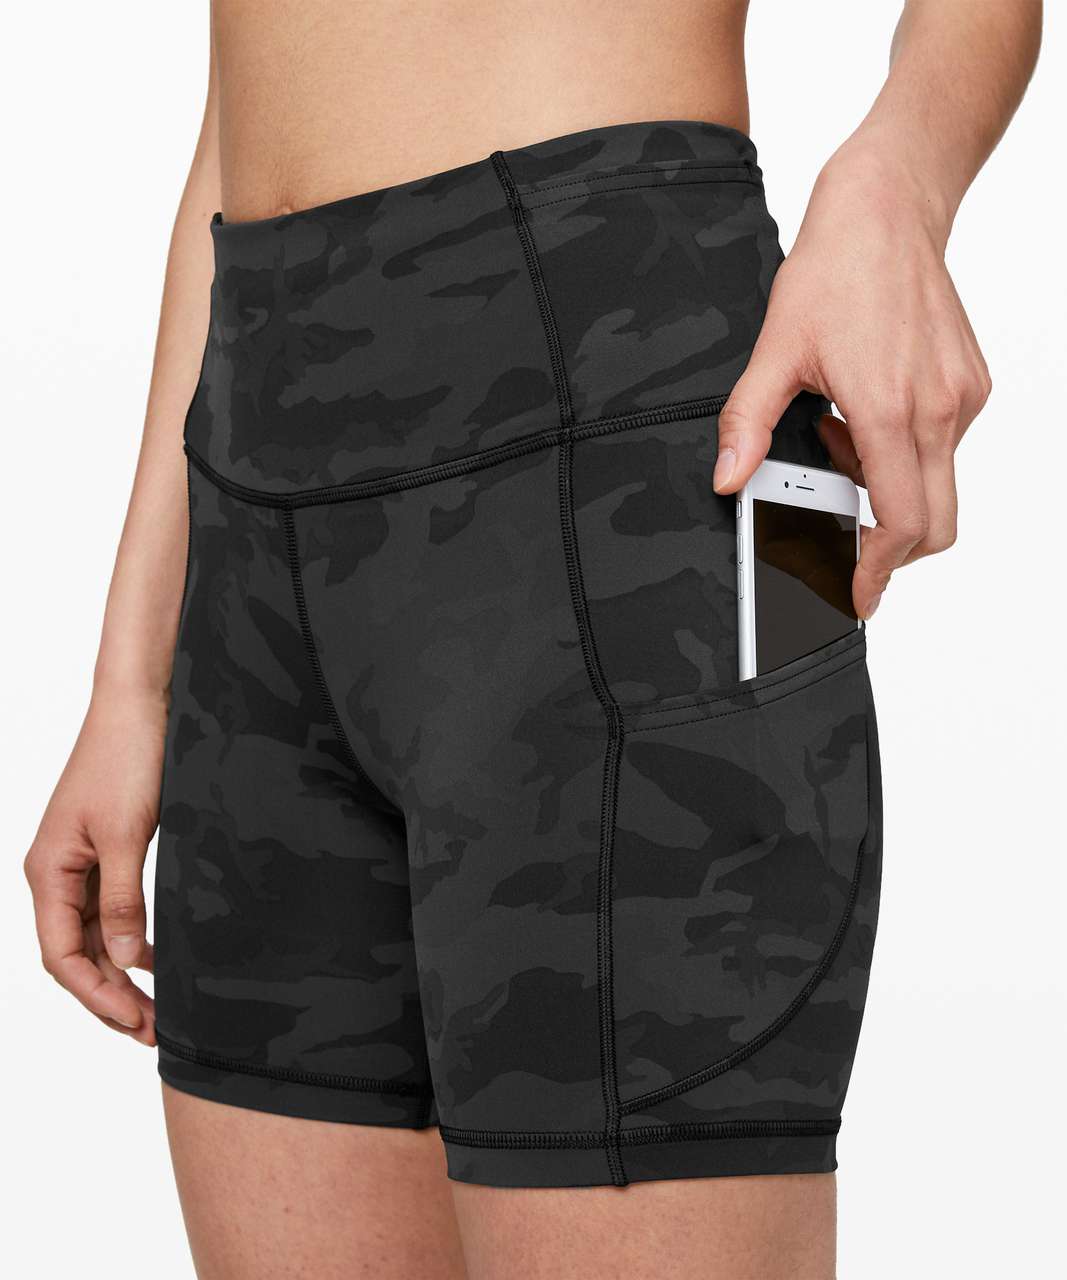 Grey Camo Lululemon Shorts For Women  International Society of Precision  Agriculture